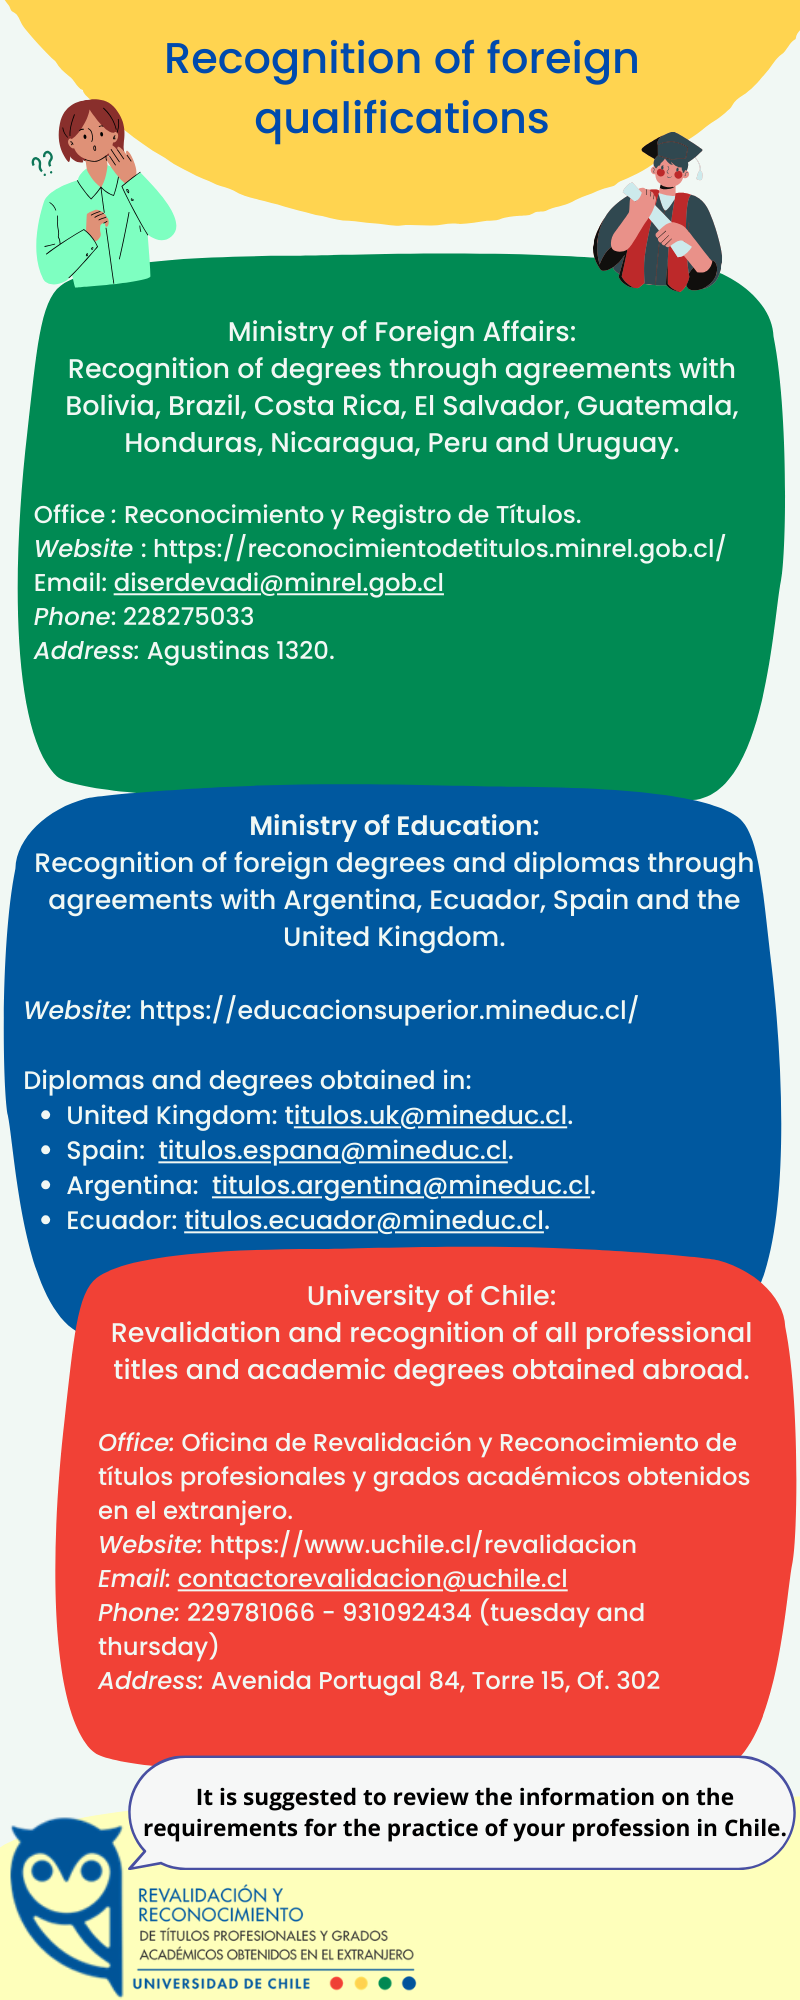 Recognition of foreign qualifications